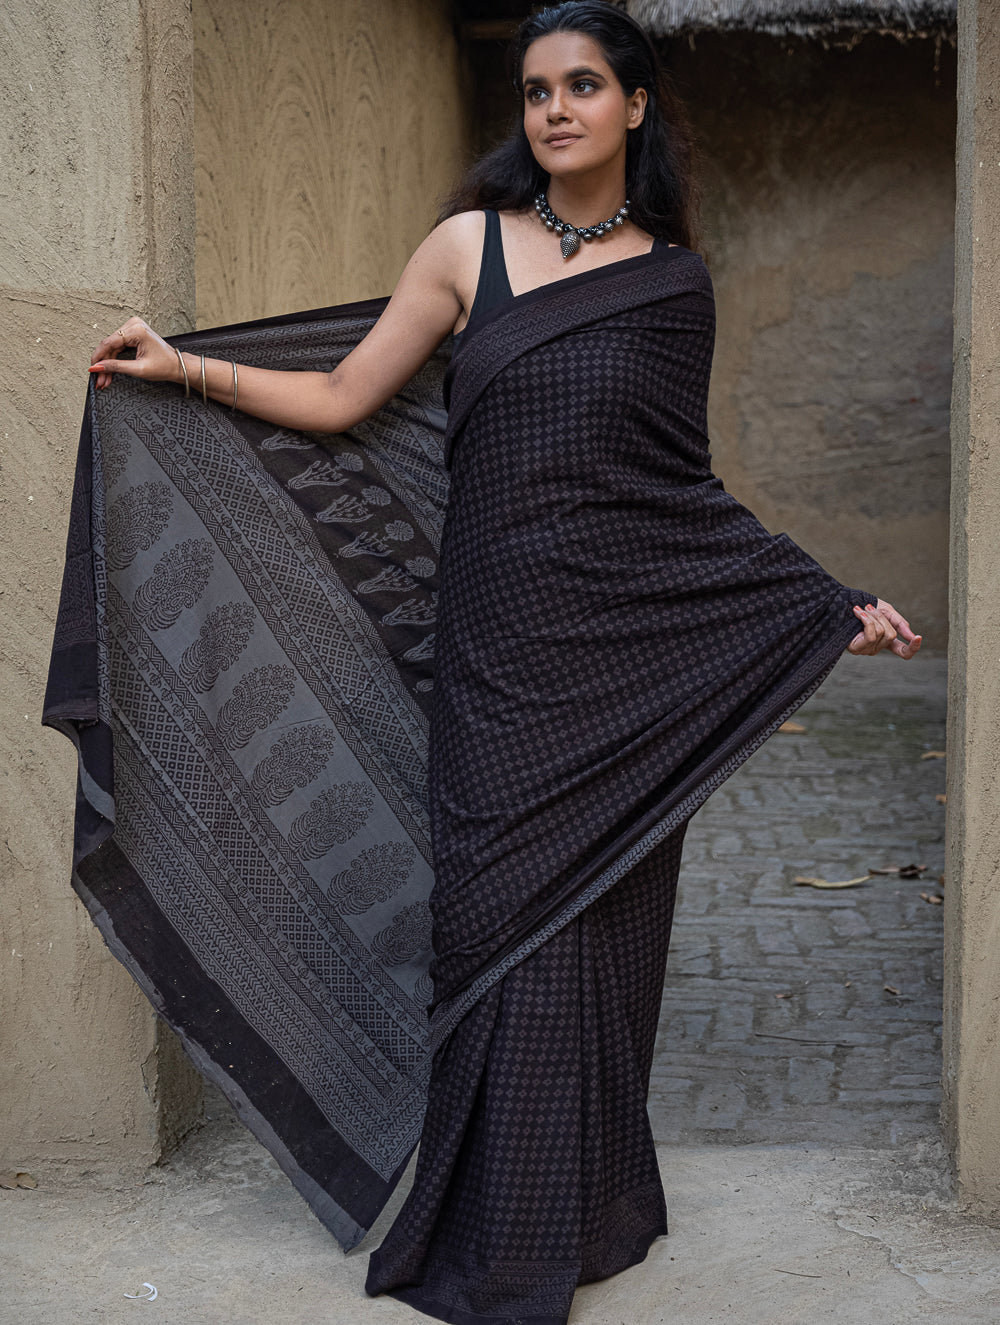 Load image into Gallery viewer, Exclusive Bagh Hand Block Printed Cotton Saree - Grey Diamonds